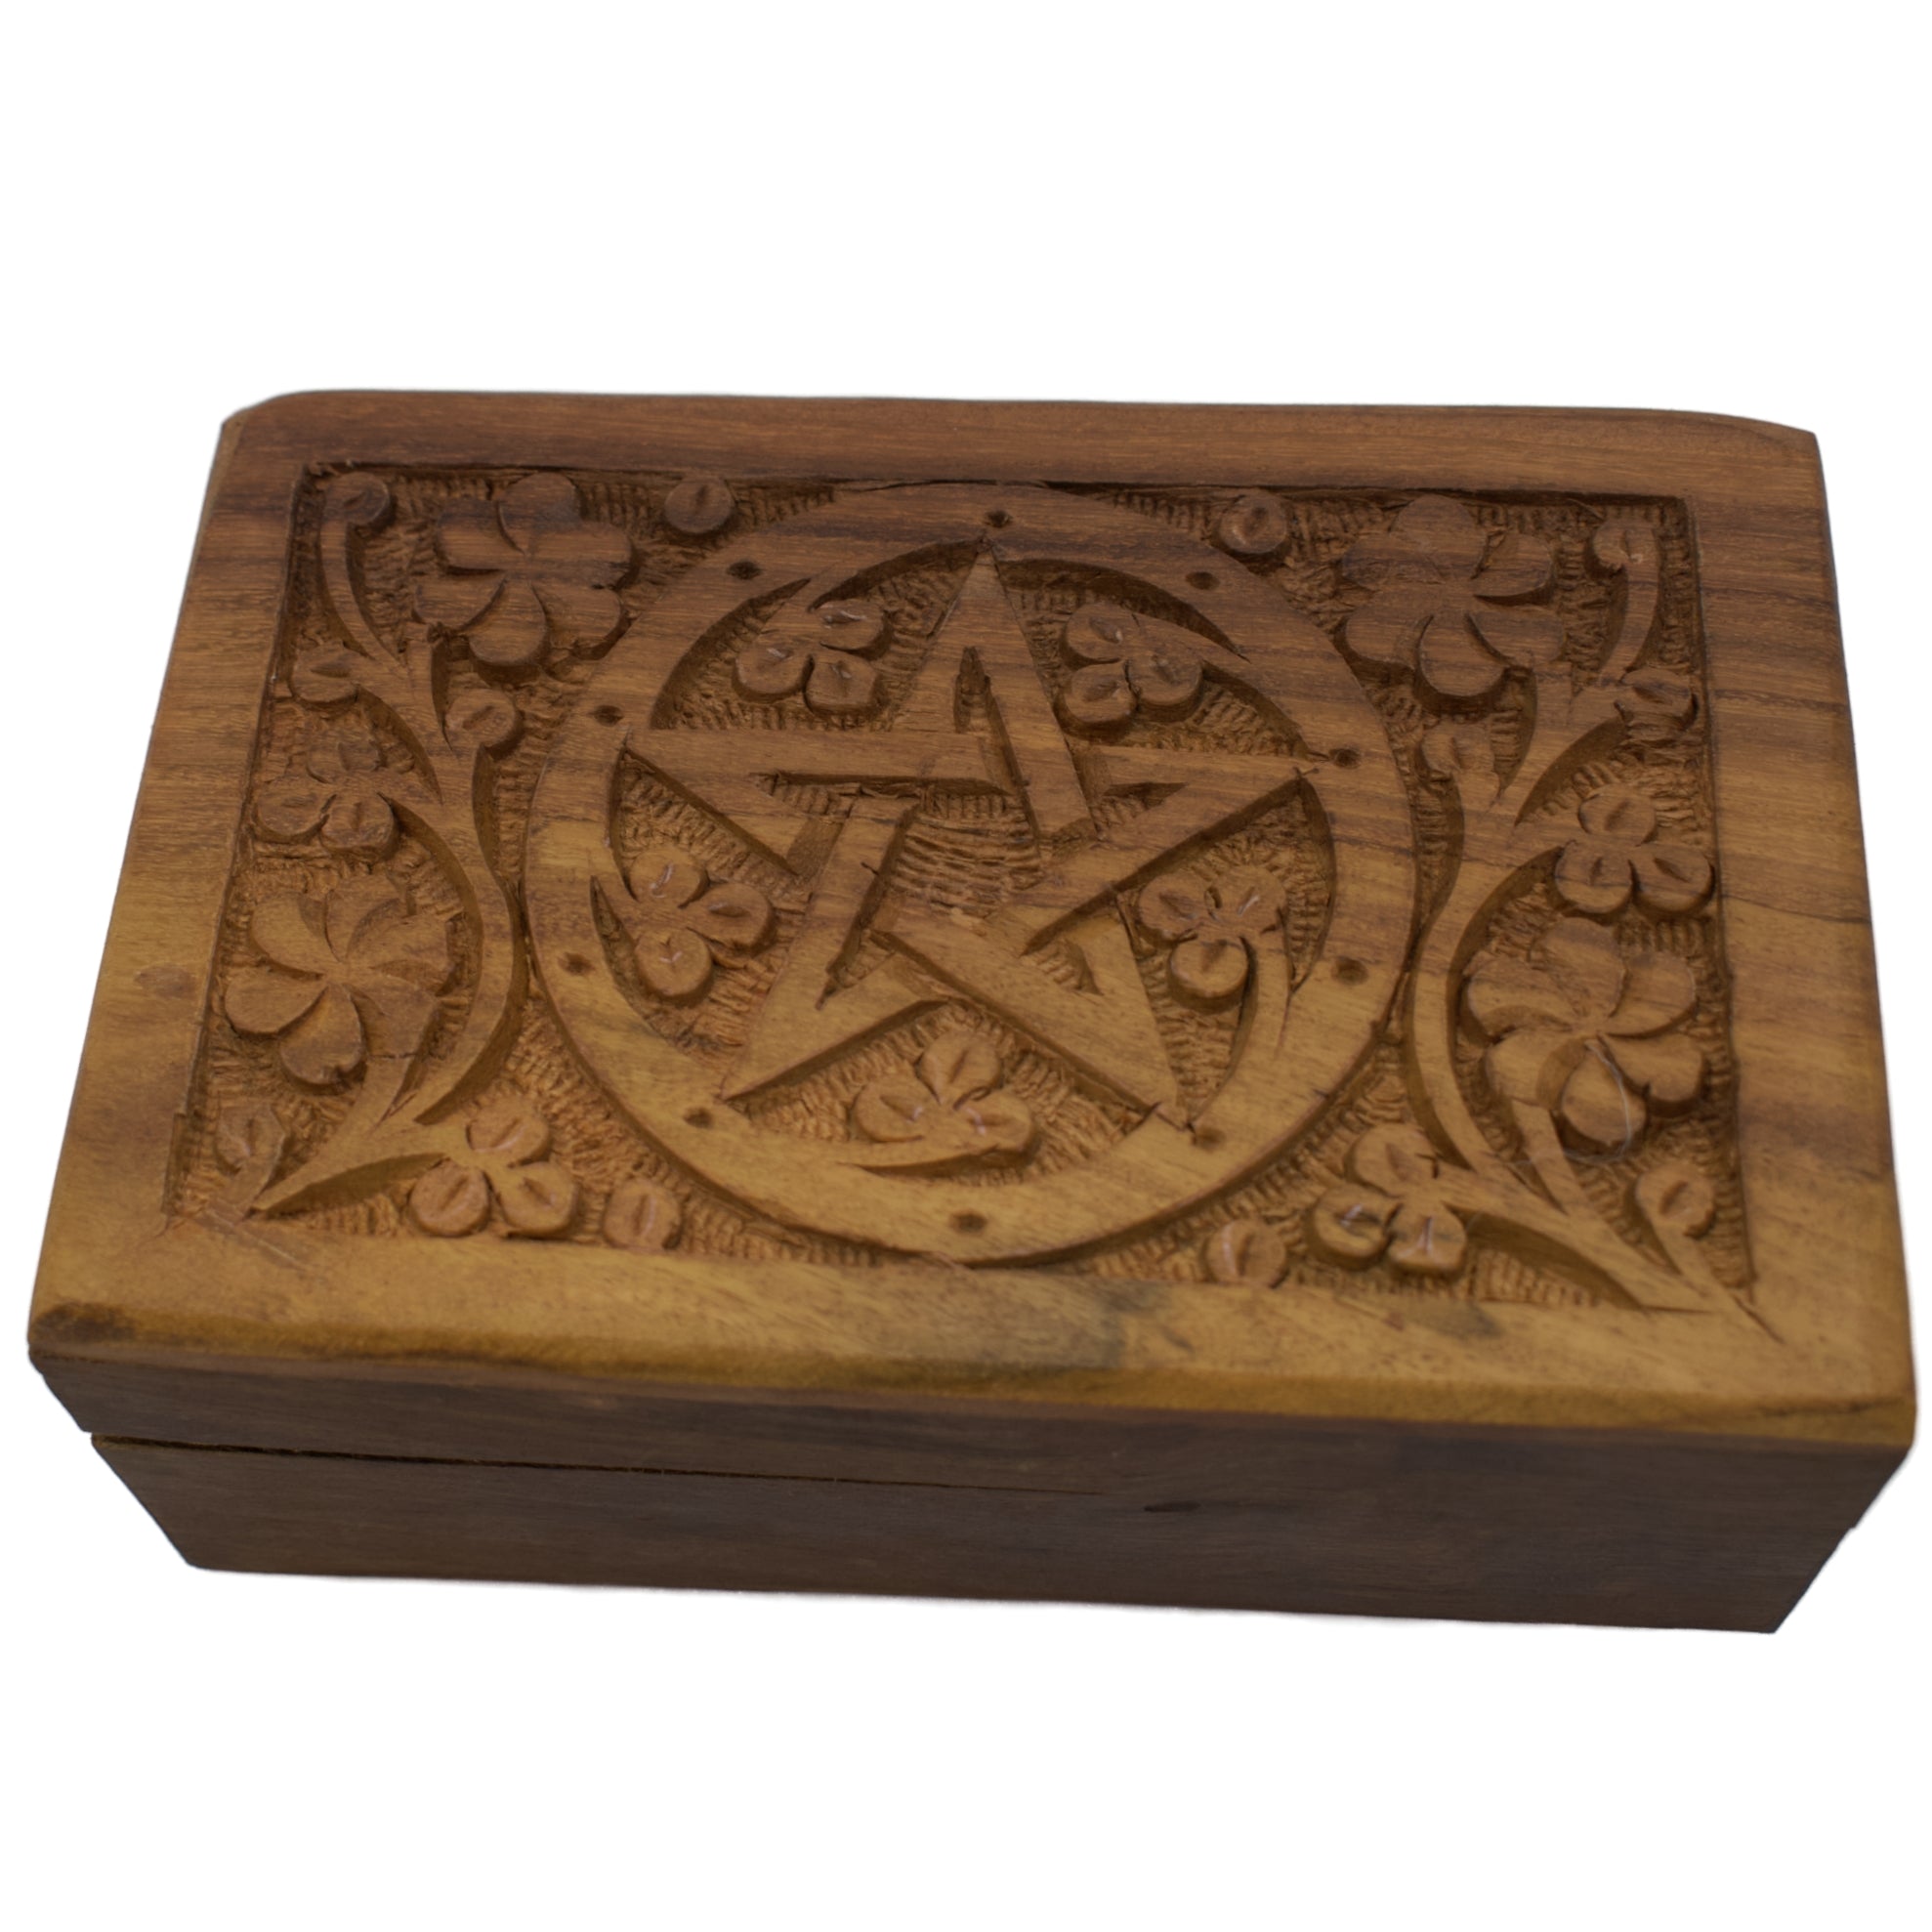 carved wood box with pentacle surrounded with flowers in center, fl